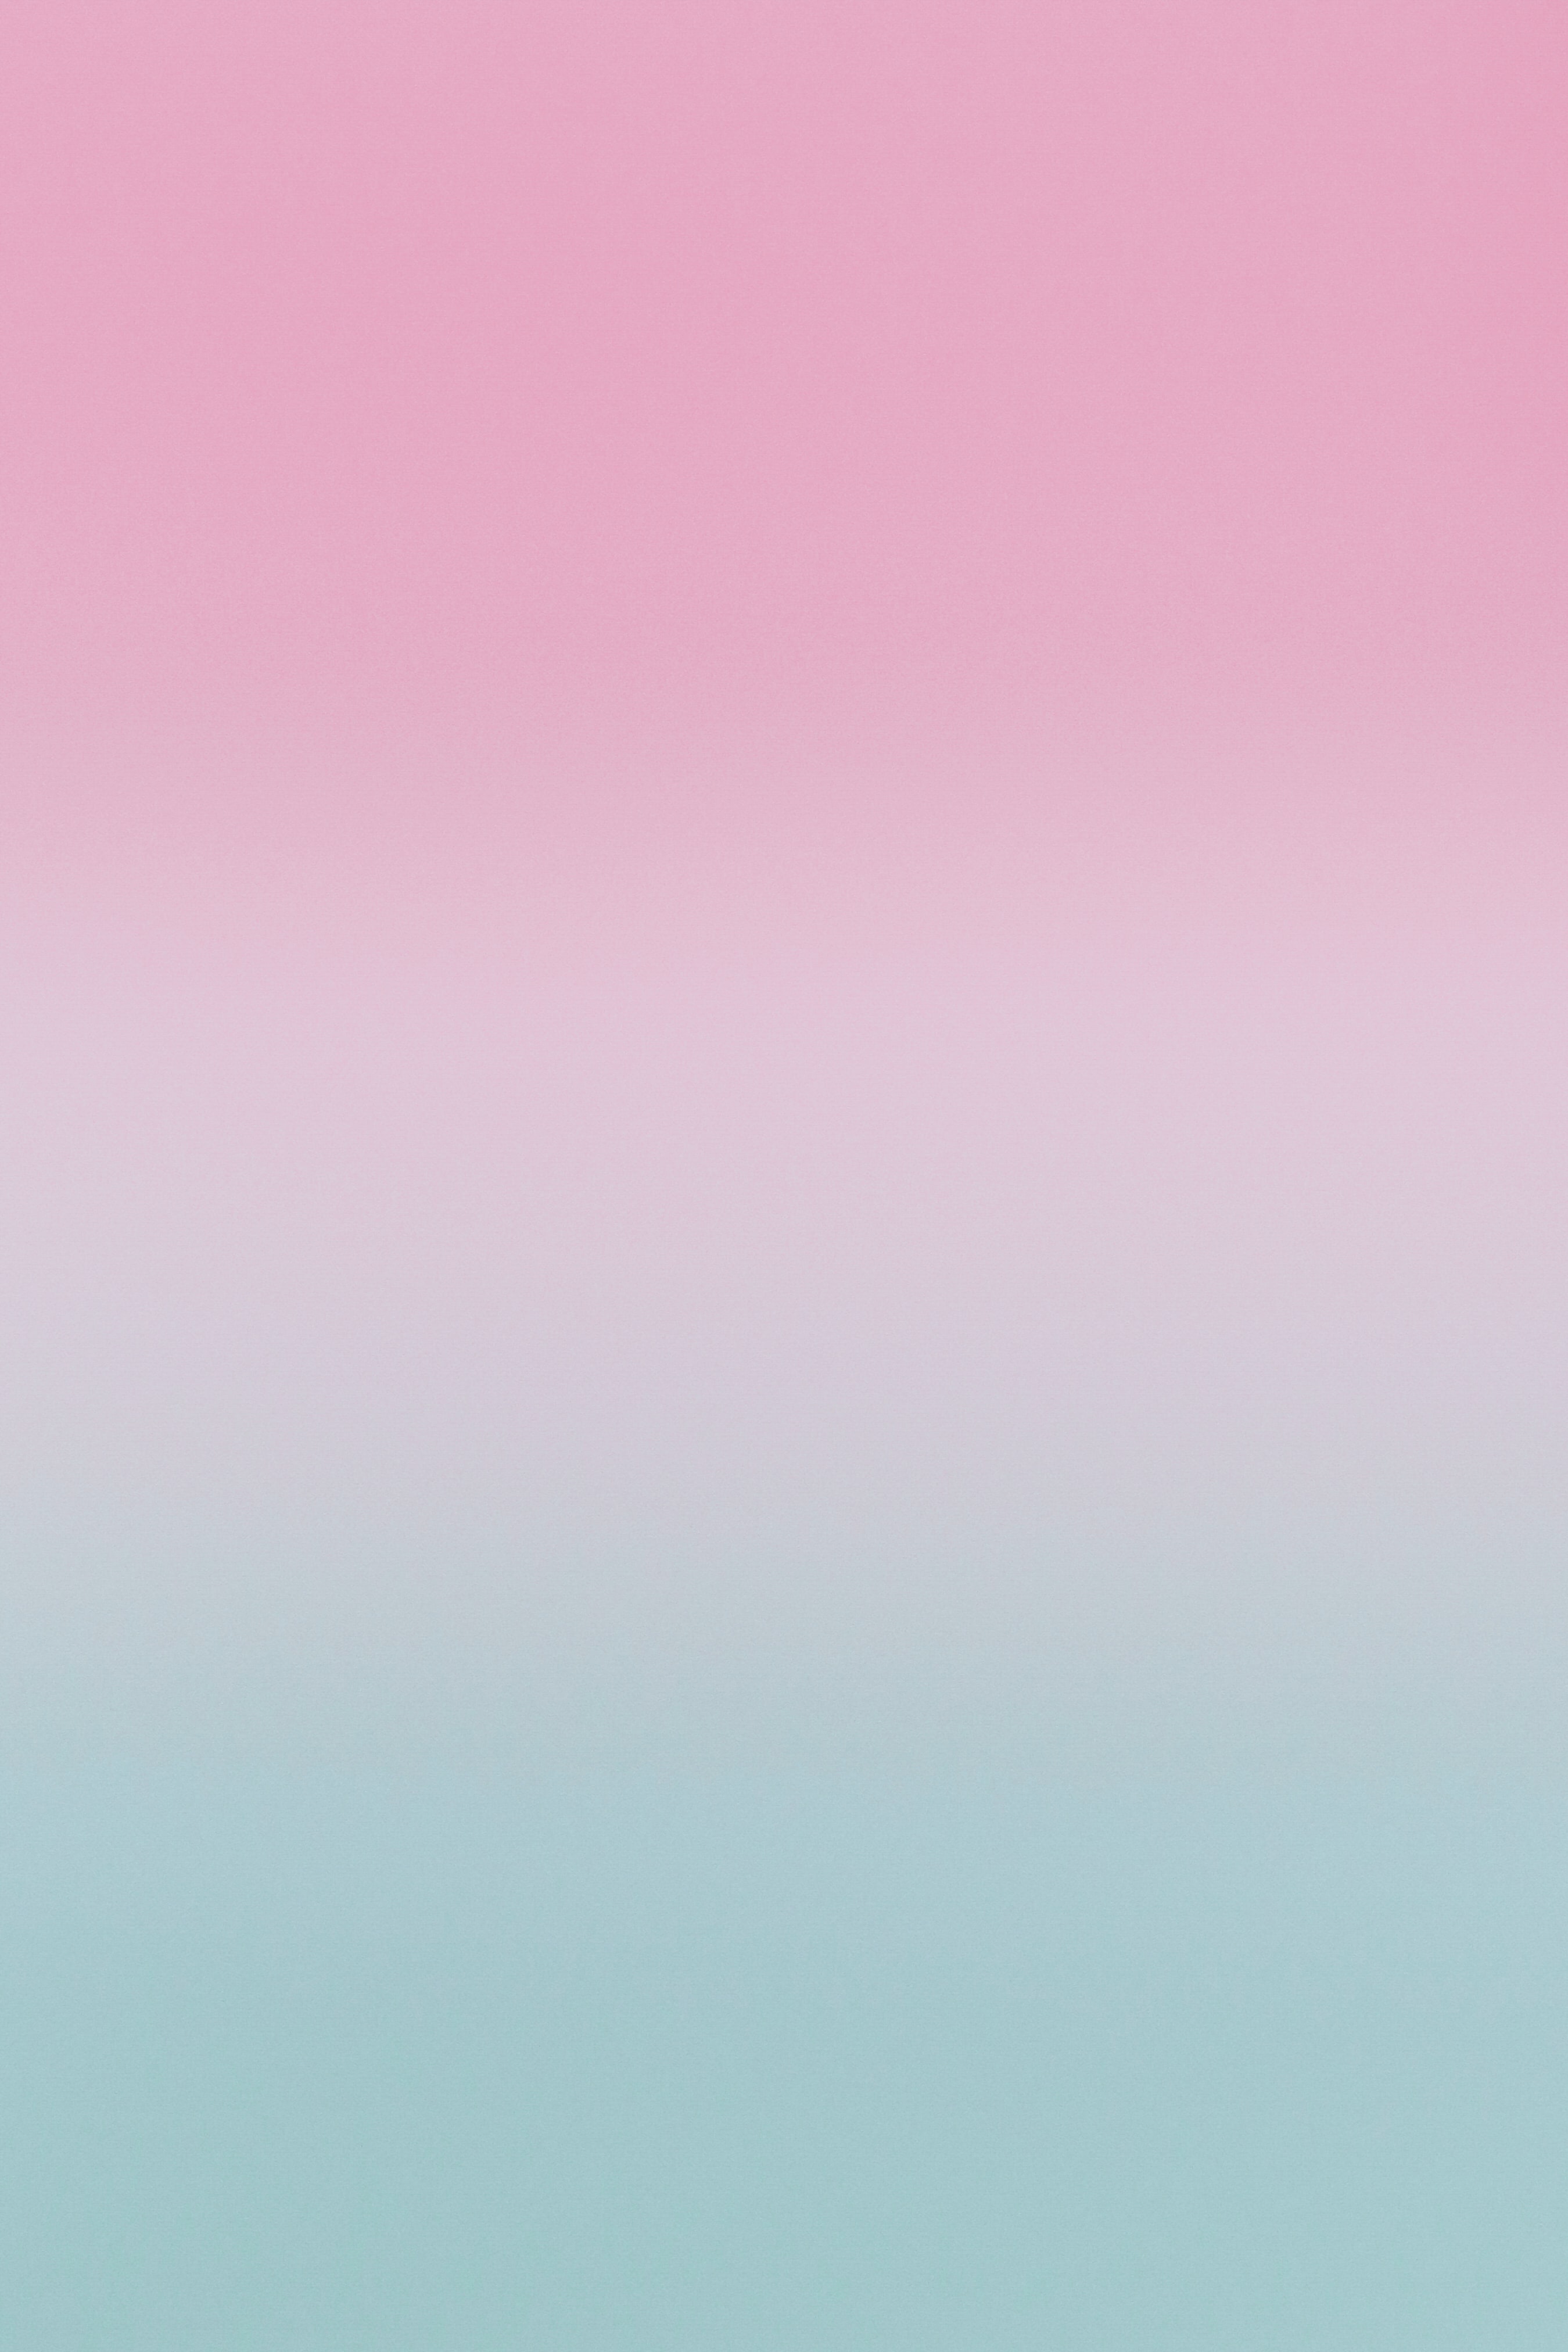 pink, blur, gradient, blue, abstract, smooth mobile wallpaper